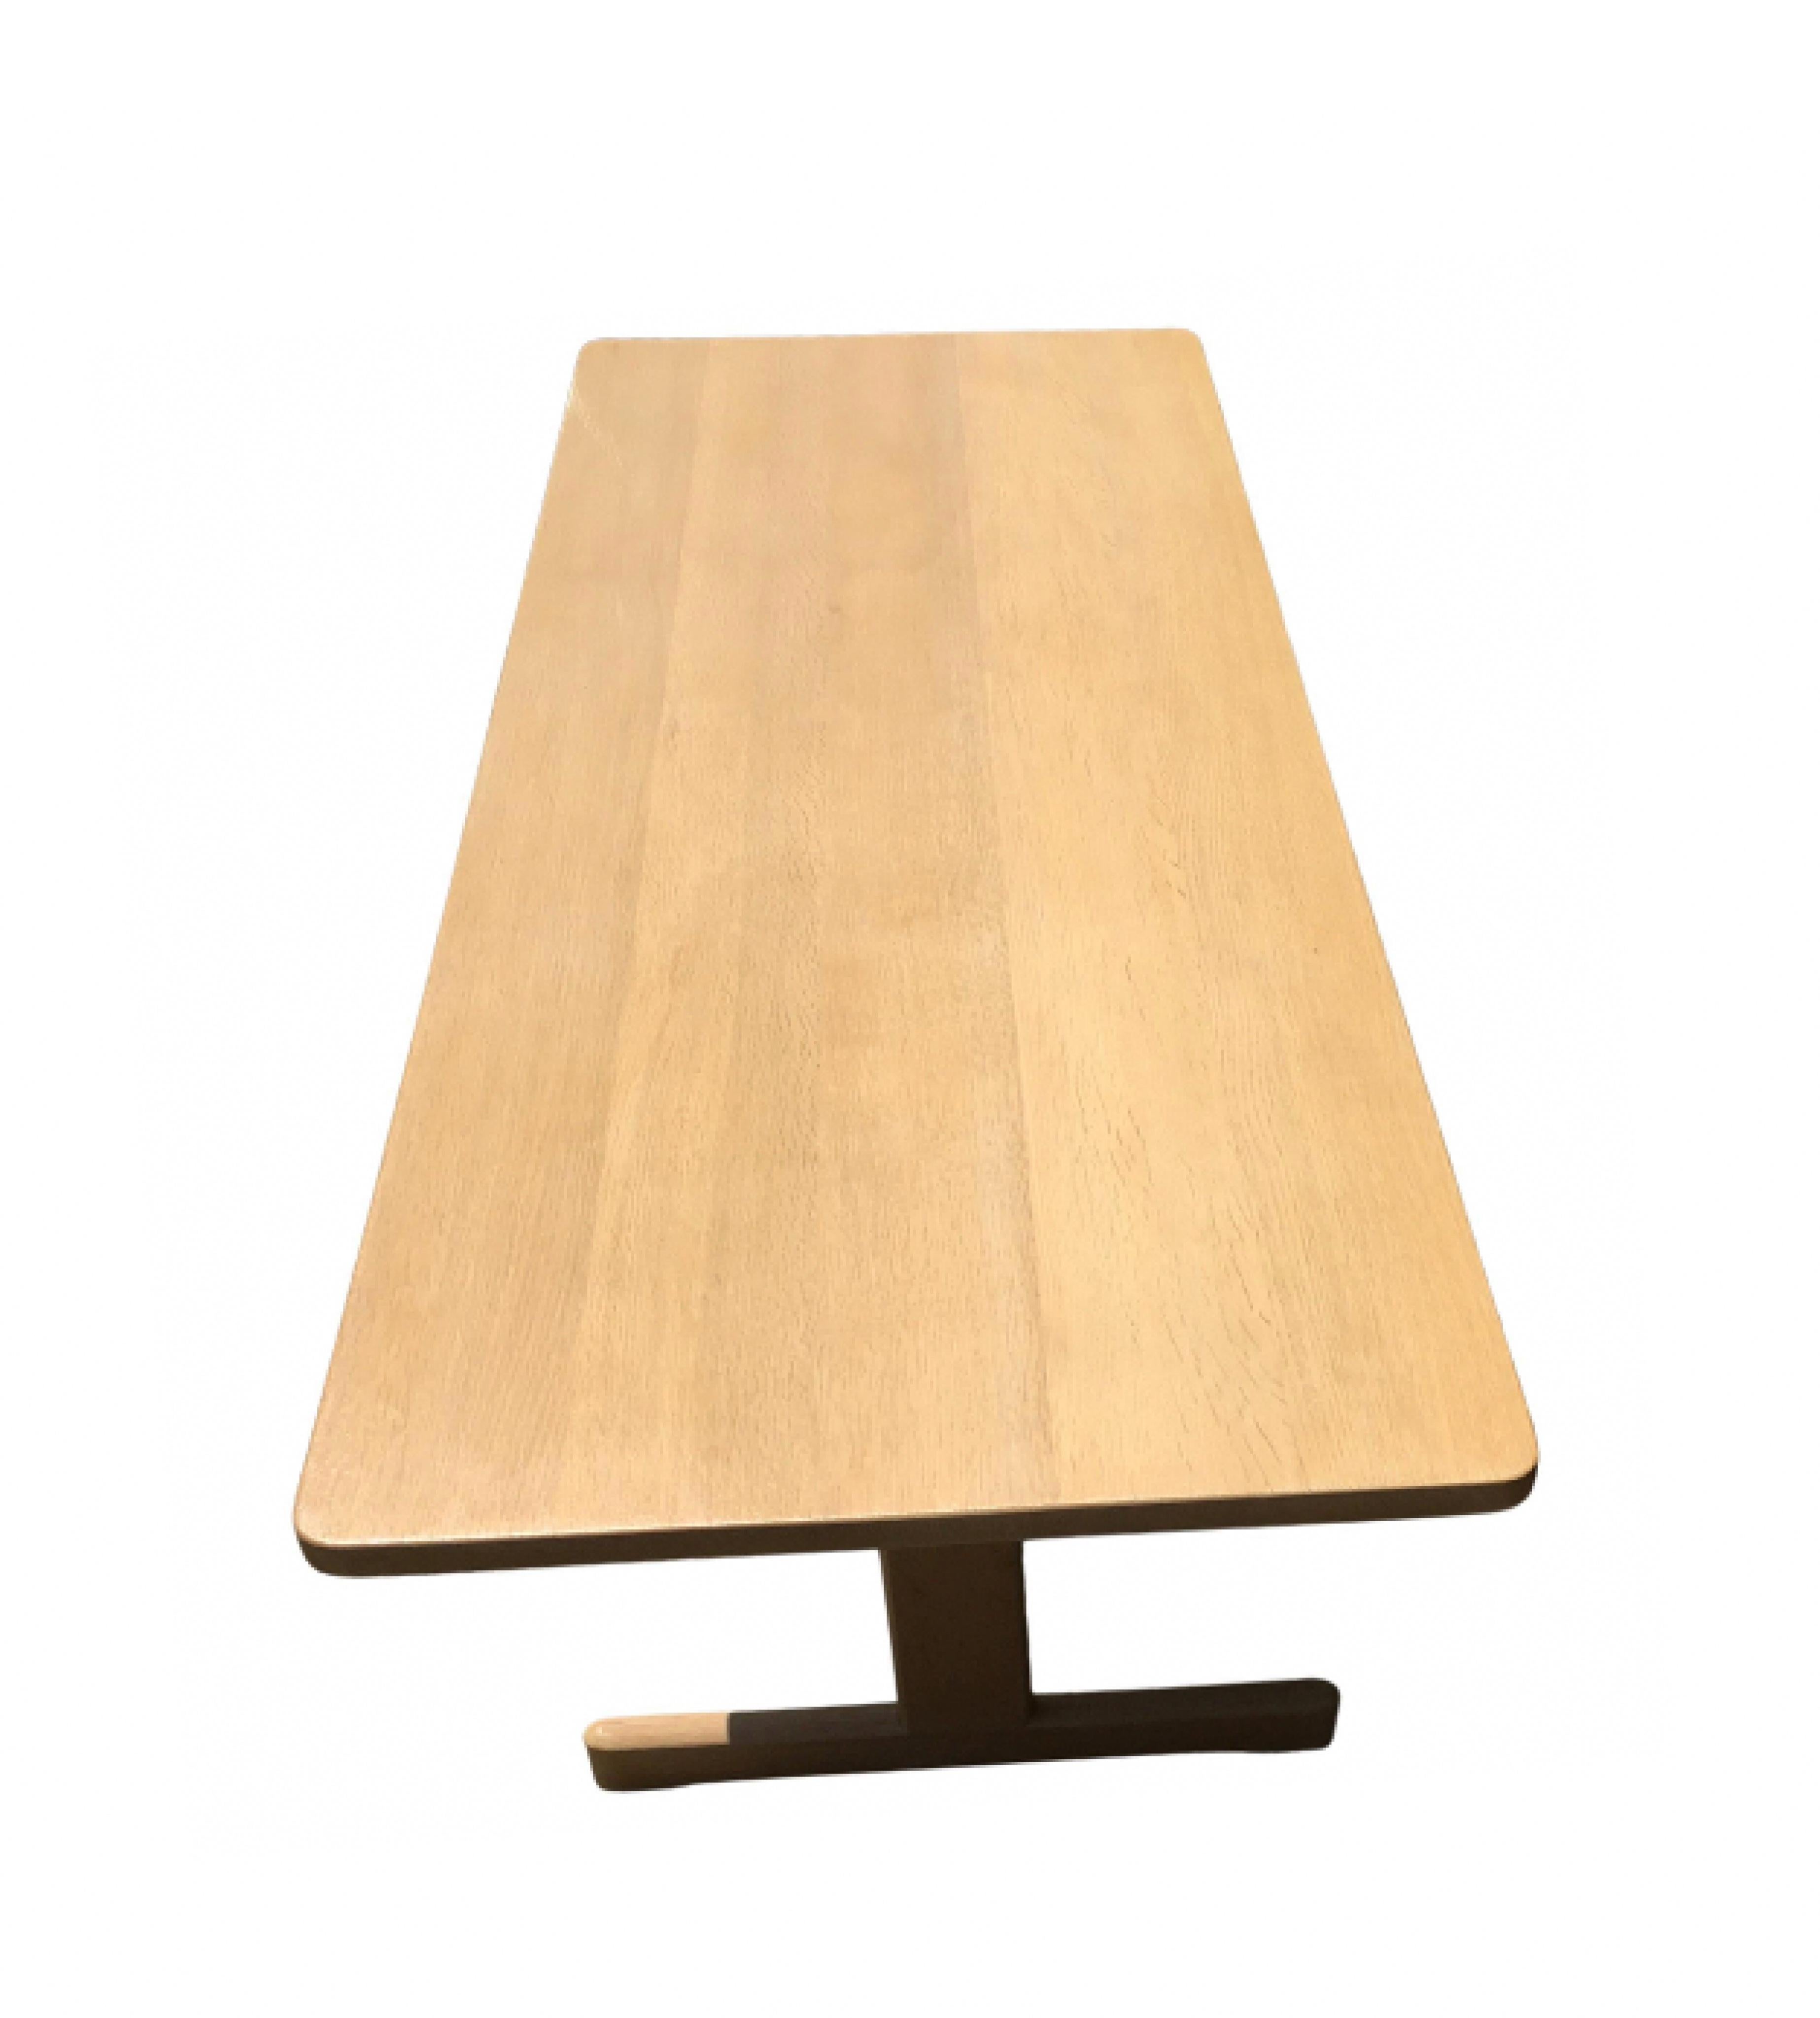 Børge Mogensen Coffee Table No 5269 for Fredericia Furniture In Excellent Condition For Sale In Copenhagen, DK